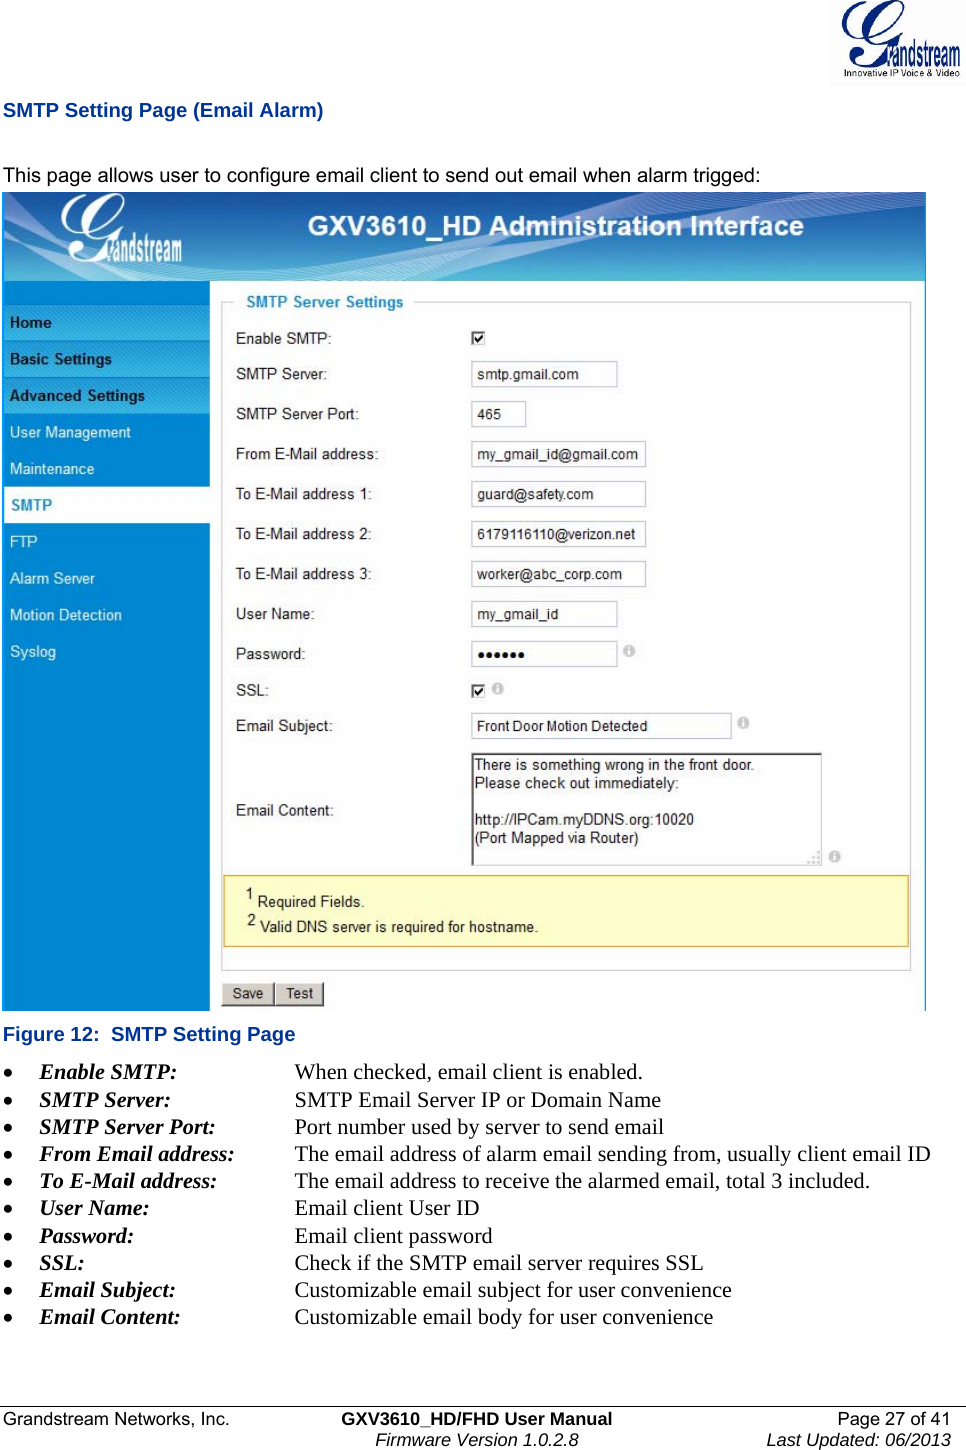  Grandstream Networks, Inc.  GXV3610_HD/FHD User Manual  Page 27 of 41    Firmware Version 1.0.2.8  Last Updated: 06/2013  SMTP Setting Page (Email Alarm)  This page allows user to configure email client to send out email when alarm trigged:  Figure 12:  SMTP Setting Page • Enable SMTP:      When checked, email client is enabled. • SMTP Server:    SMTP Email Server IP or Domain Name • SMTP Server Port:   Port number used by server to send email • From Email address:   The email address of alarm email sending from, usually client email ID • To E-Mail address:    The email address to receive the alarmed email, total 3 included.  • User Name:     Email client User ID • Password:      Email client password • SSL:      Check if the SMTP email server requires SSL • Email Subject:    Customizable email subject for user convenience • Email Content:    Customizable email body for user convenience    